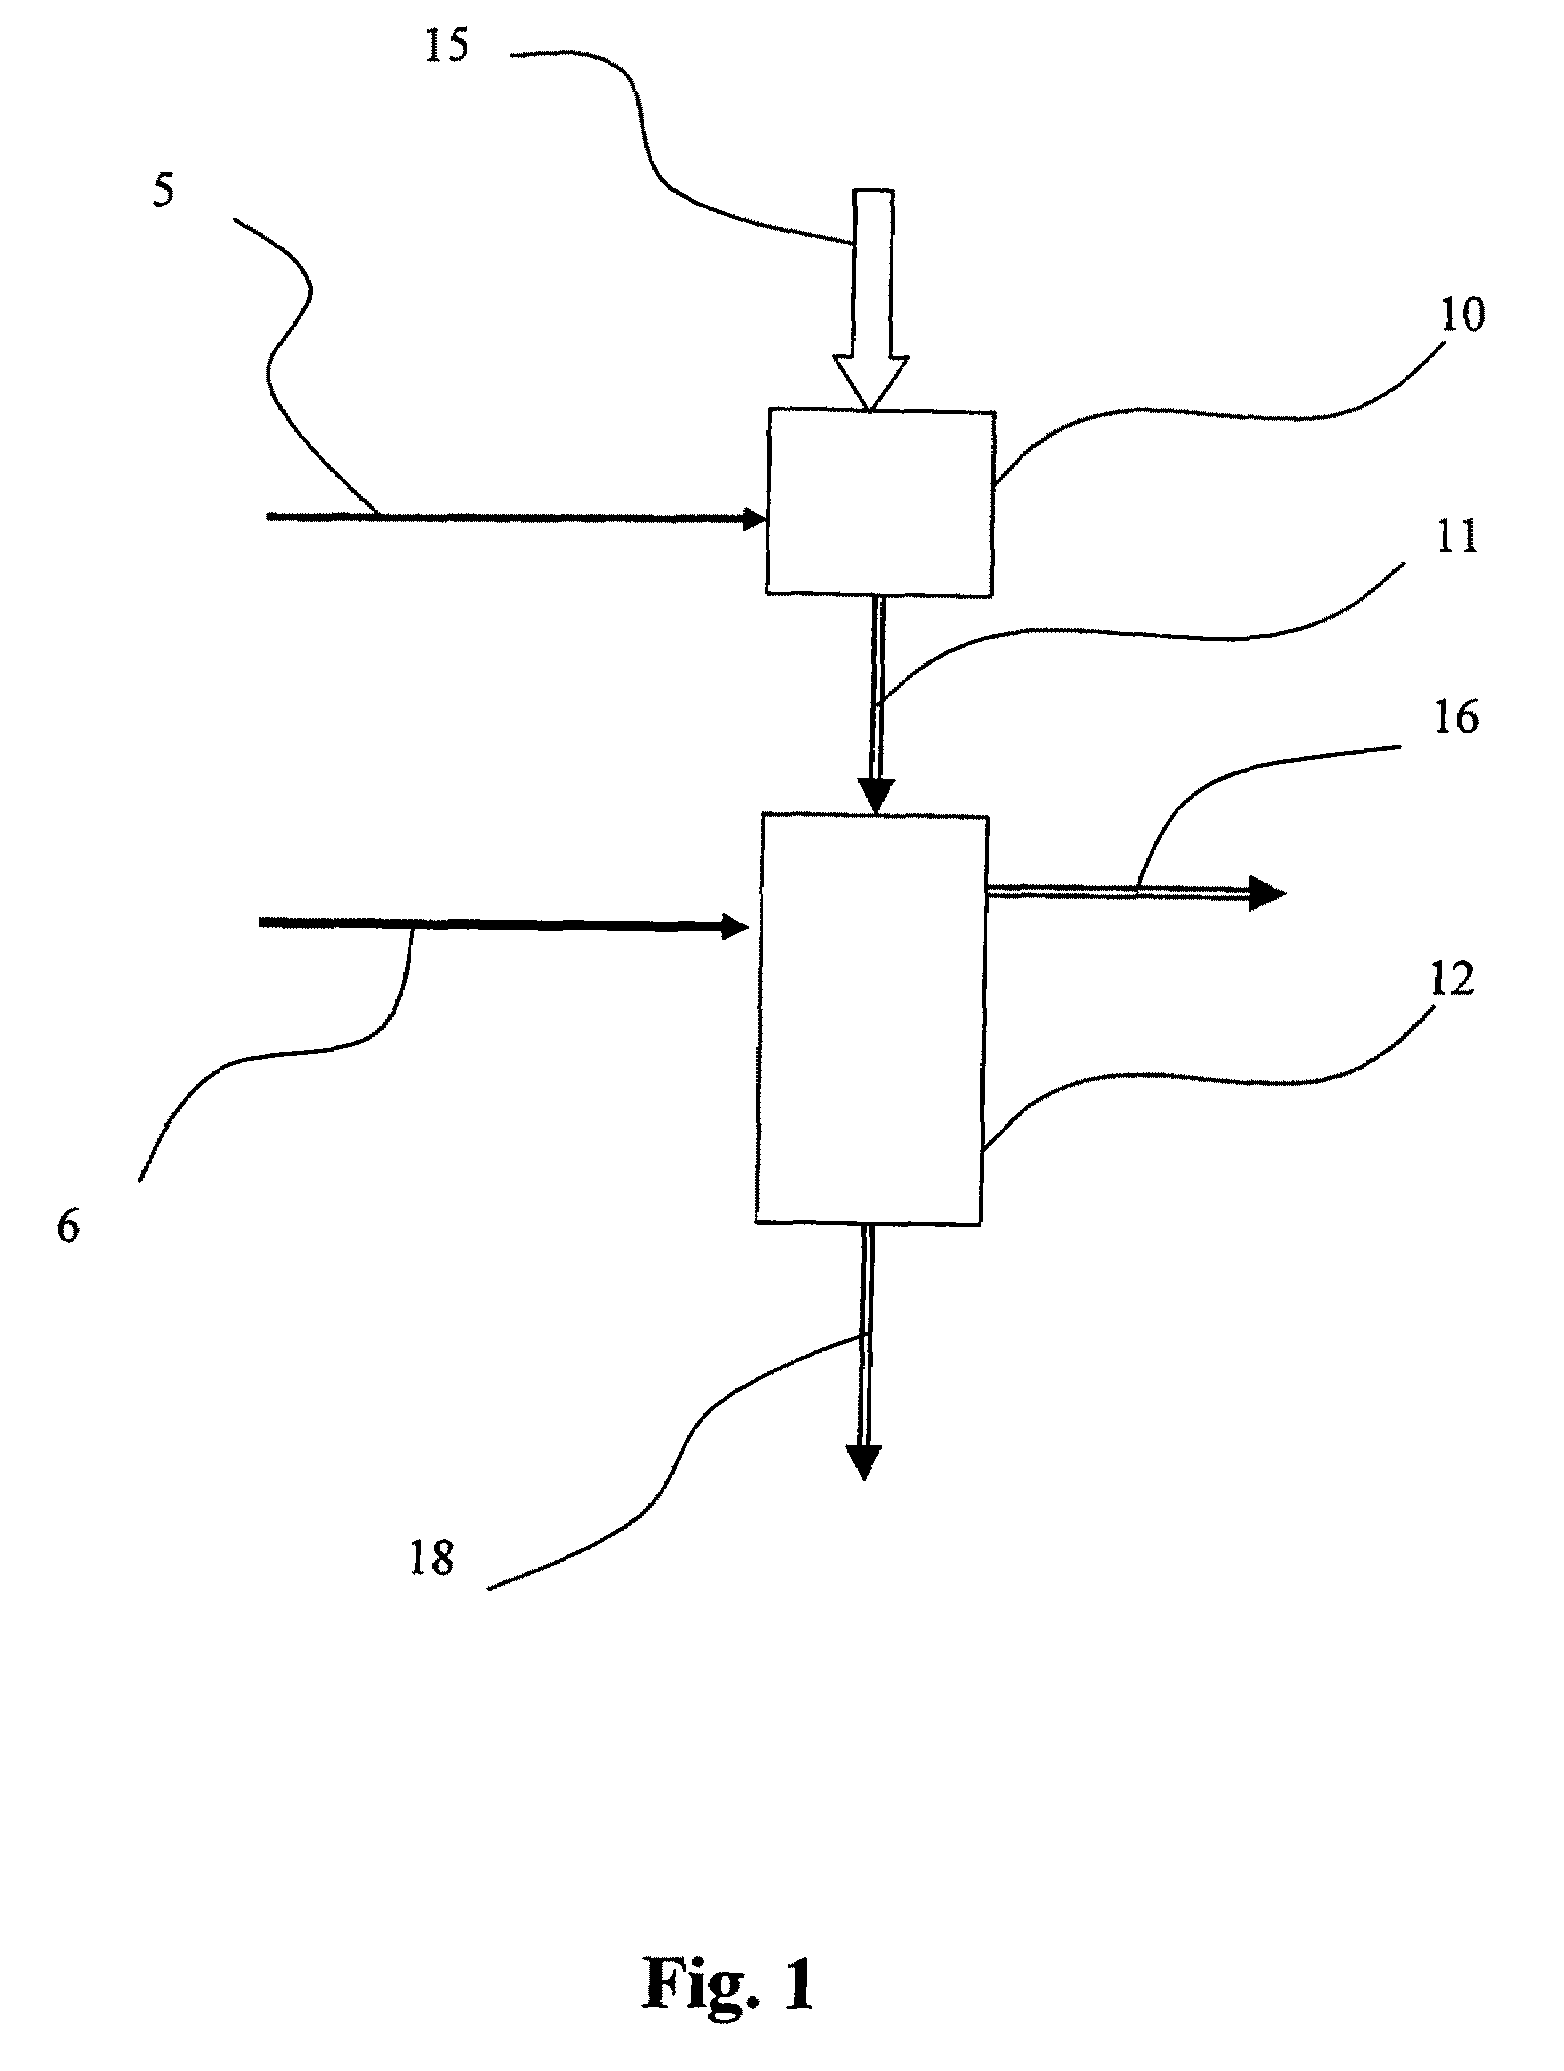 Apparatus for hydrogen and carbon production via carbon aerosol-catalyzed dissociation of hydrocarbons